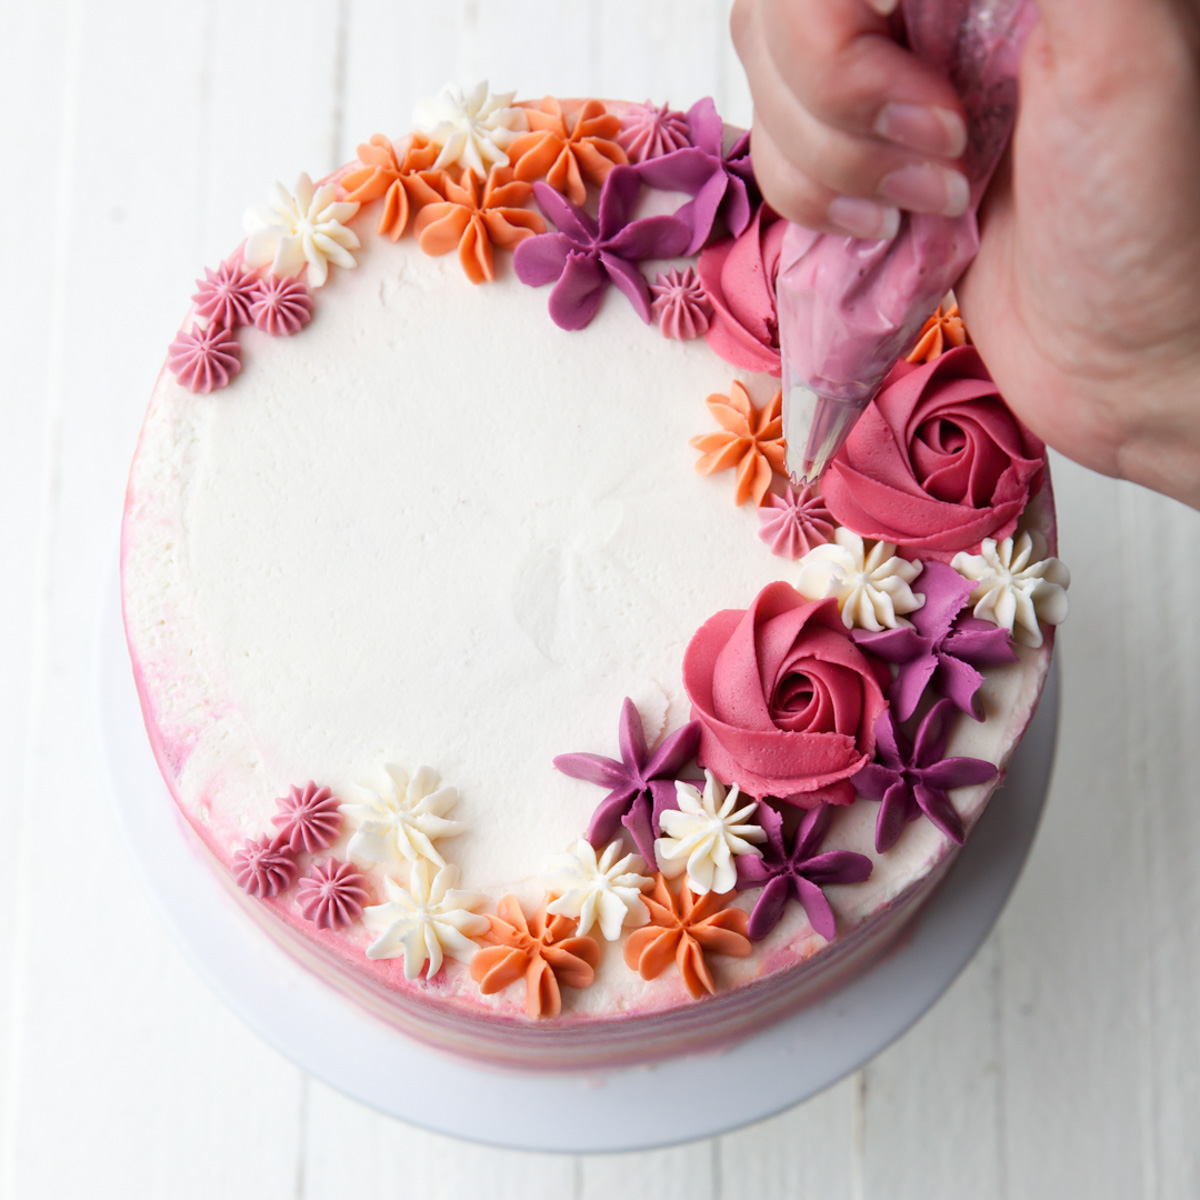 How to Decorate Birthday Cake with Butter Cream